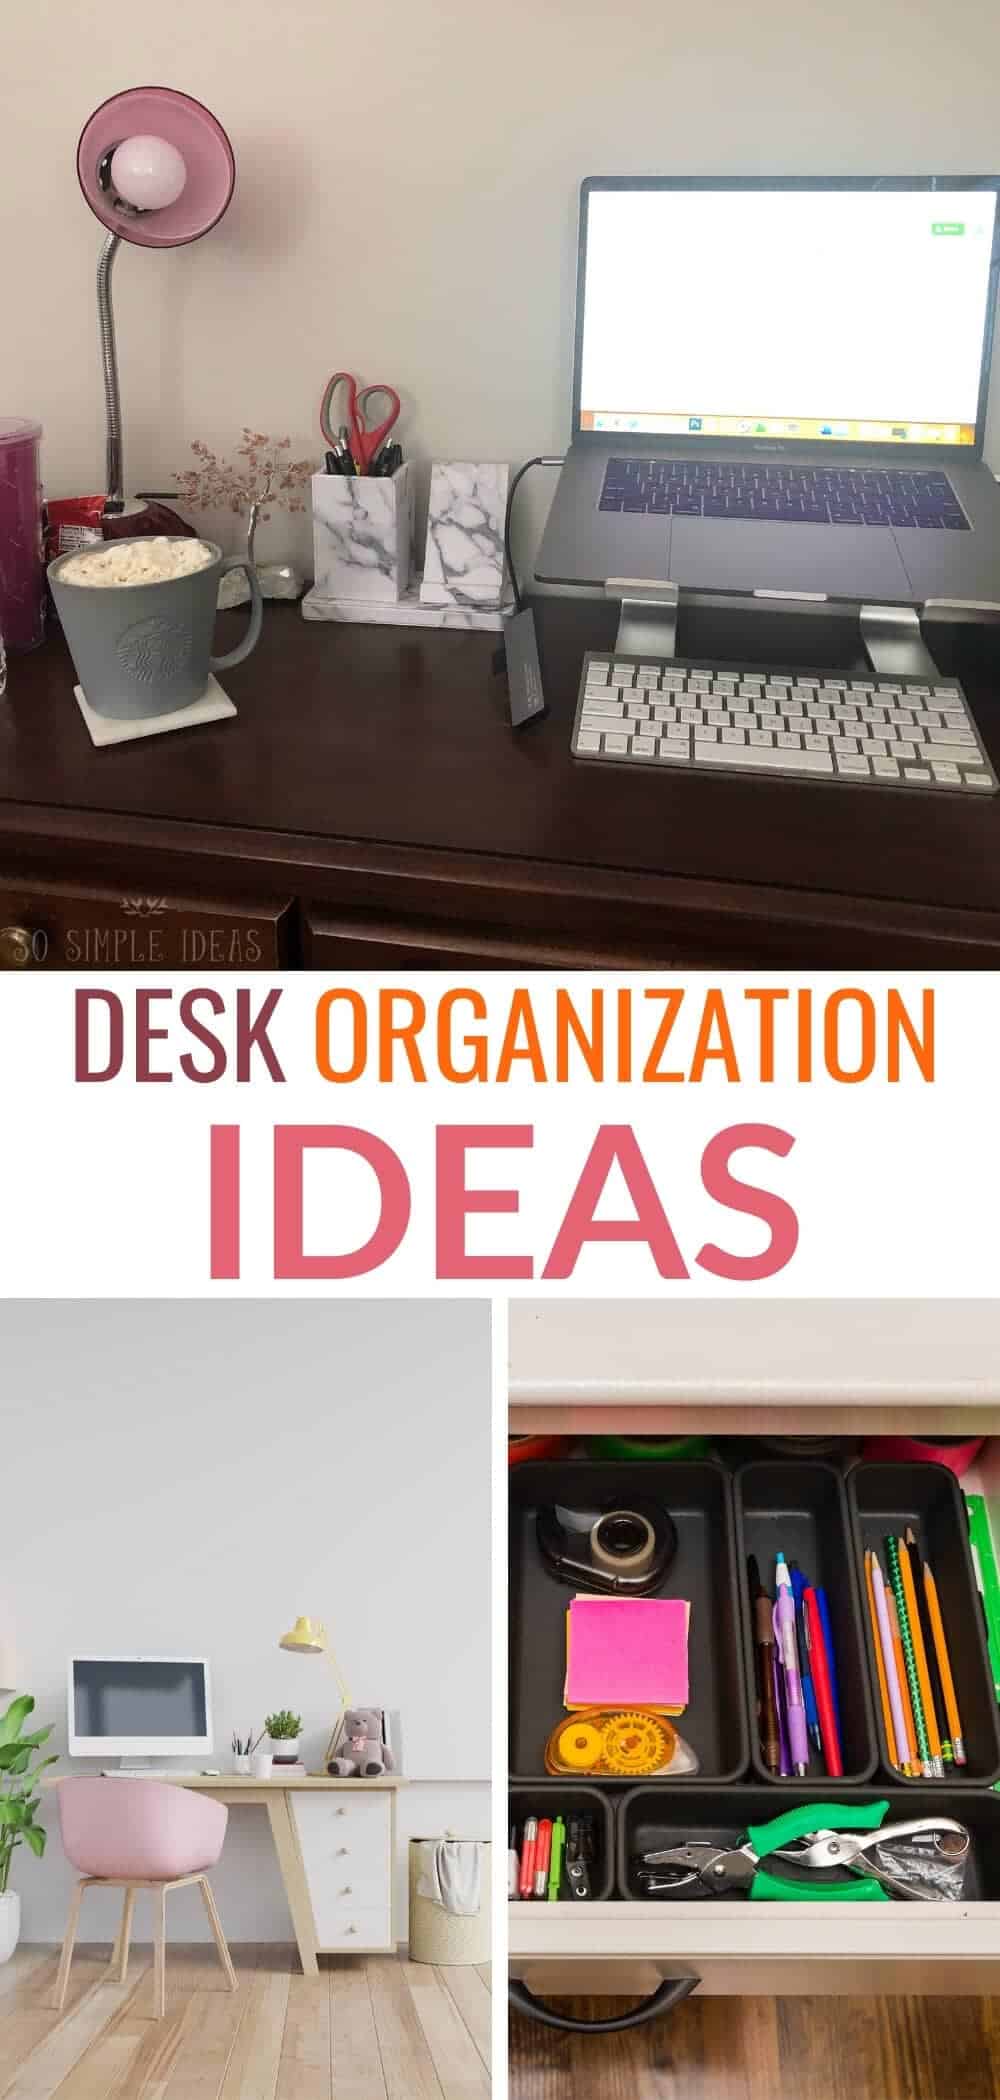 10+ Easy Desk Organization Ideas to Create the Chicest Desk Ever